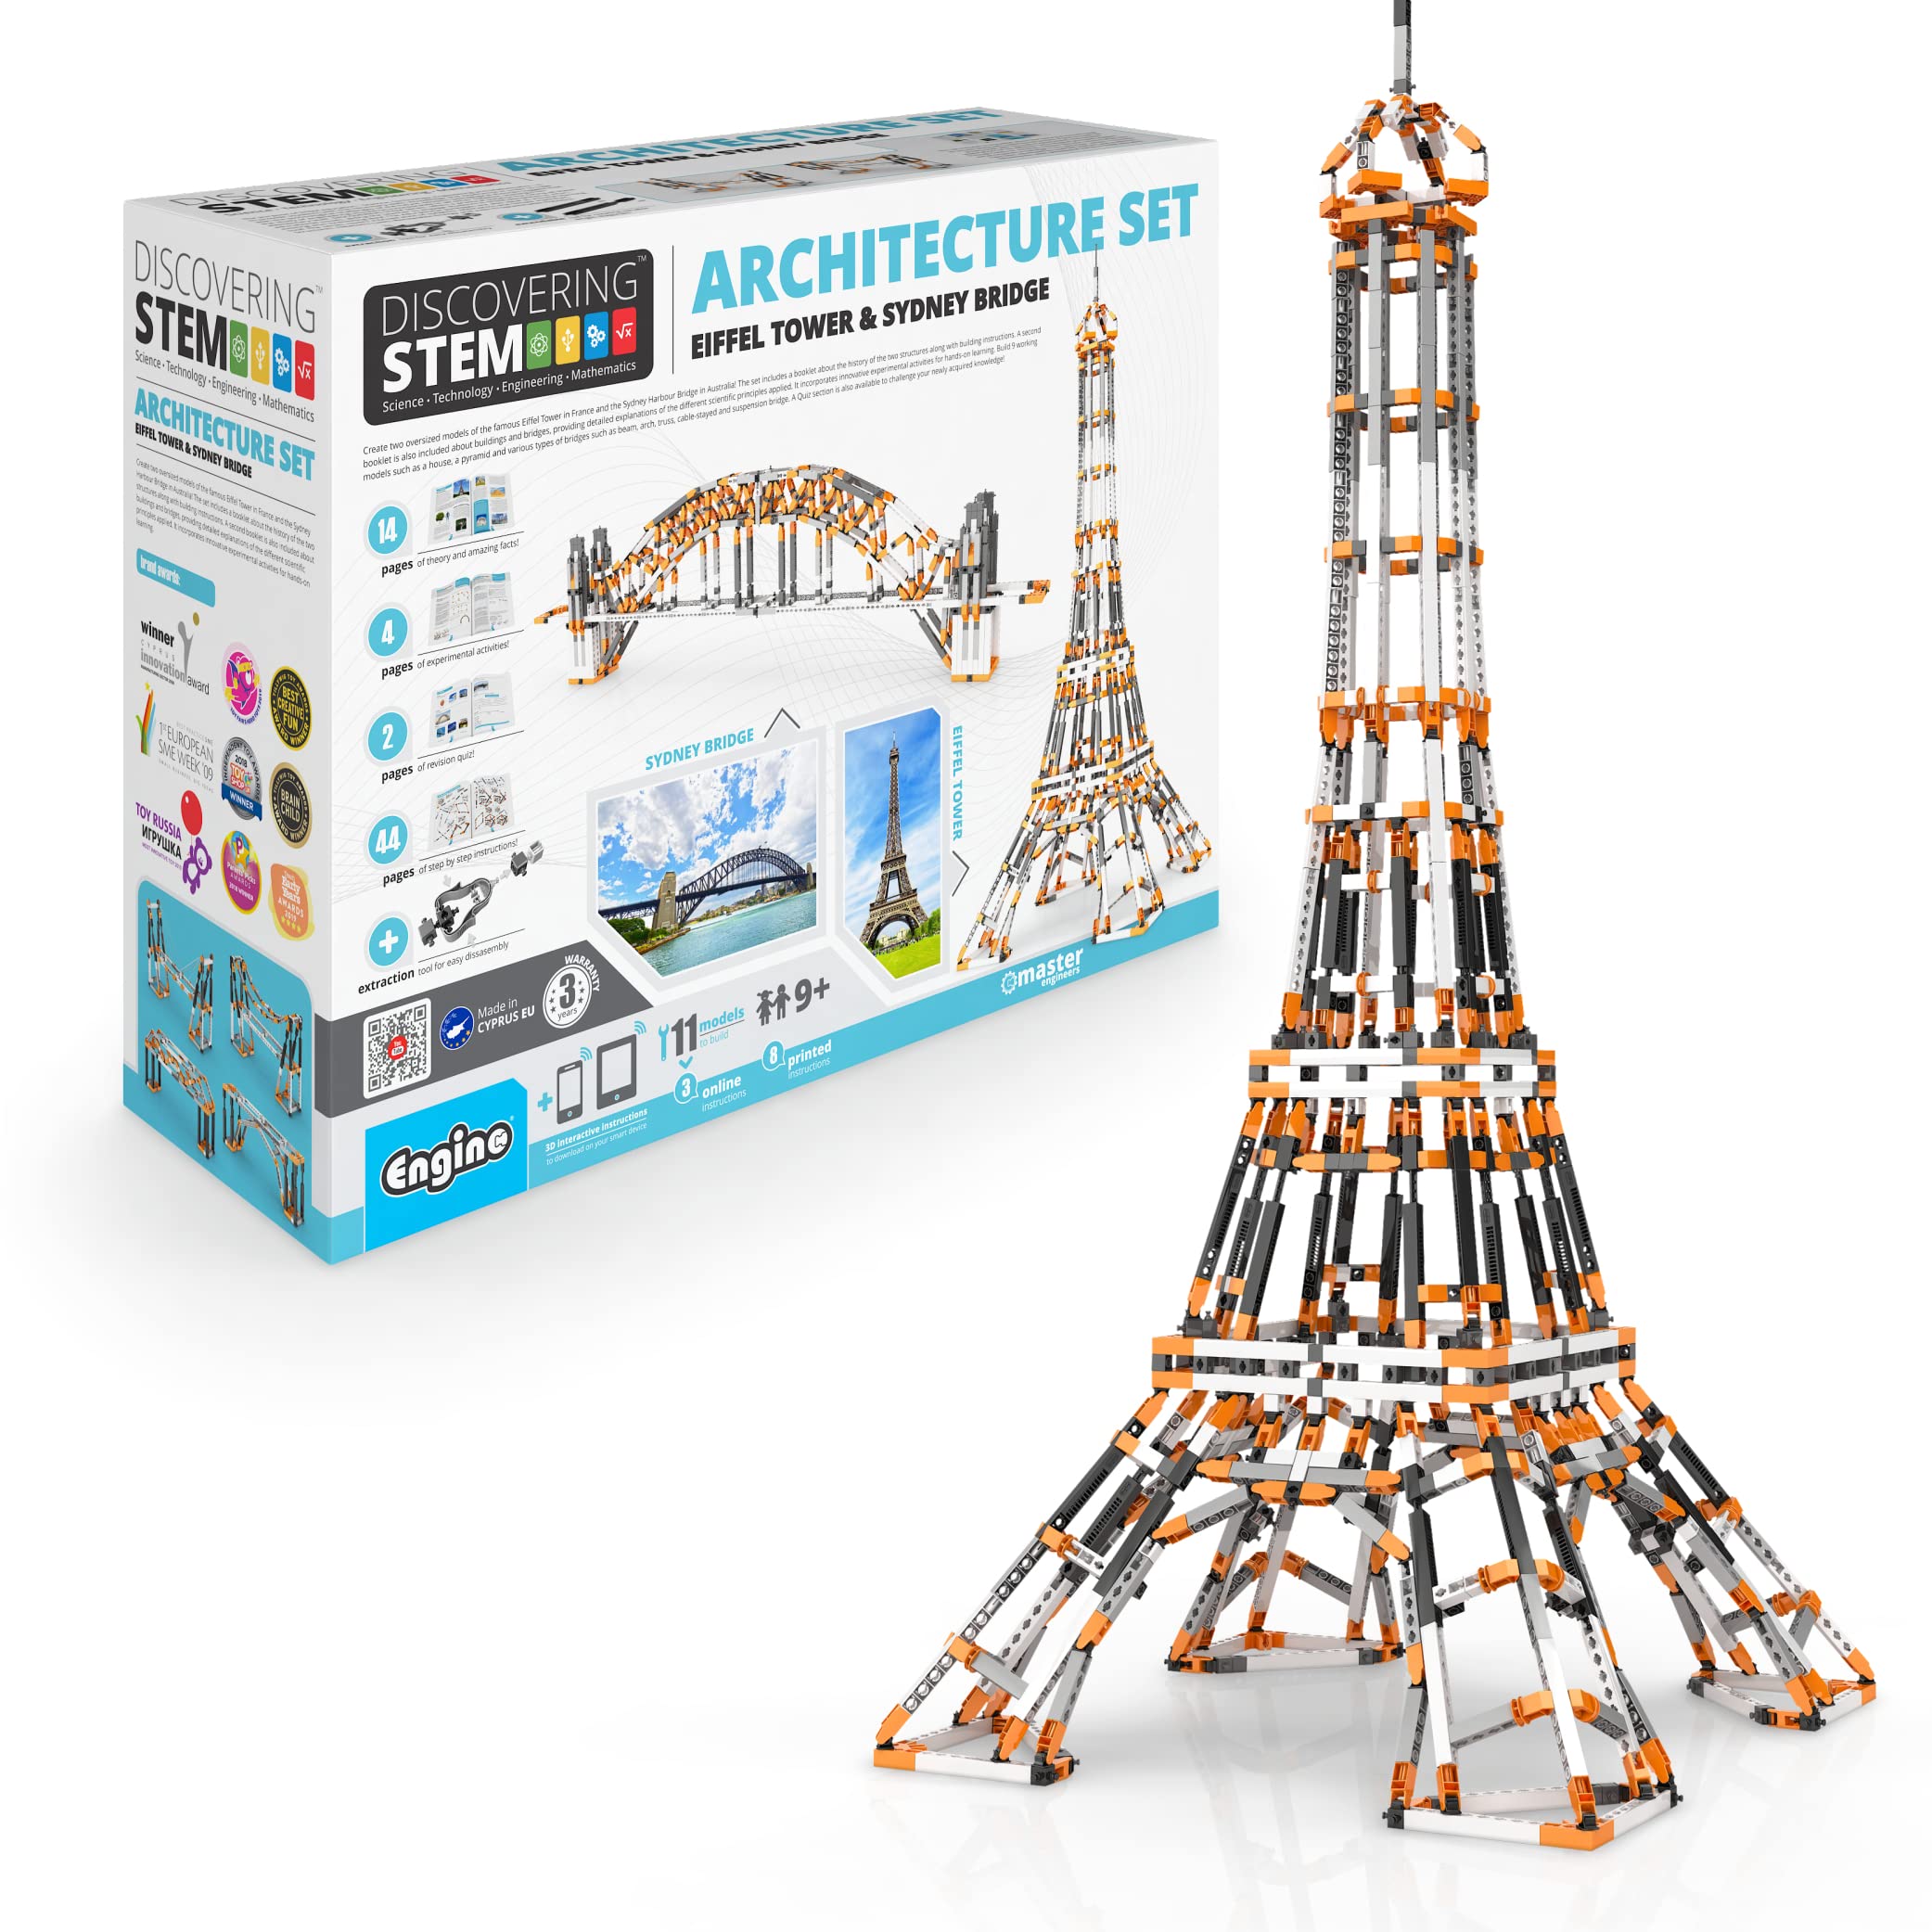 Engino - STEM Toys, Architecture Set: Eiffel Tower, Sydney Bridge - Building Toys, Educational Toys for kids 9+, Gifts for Boys & Girls (11 Model Options)